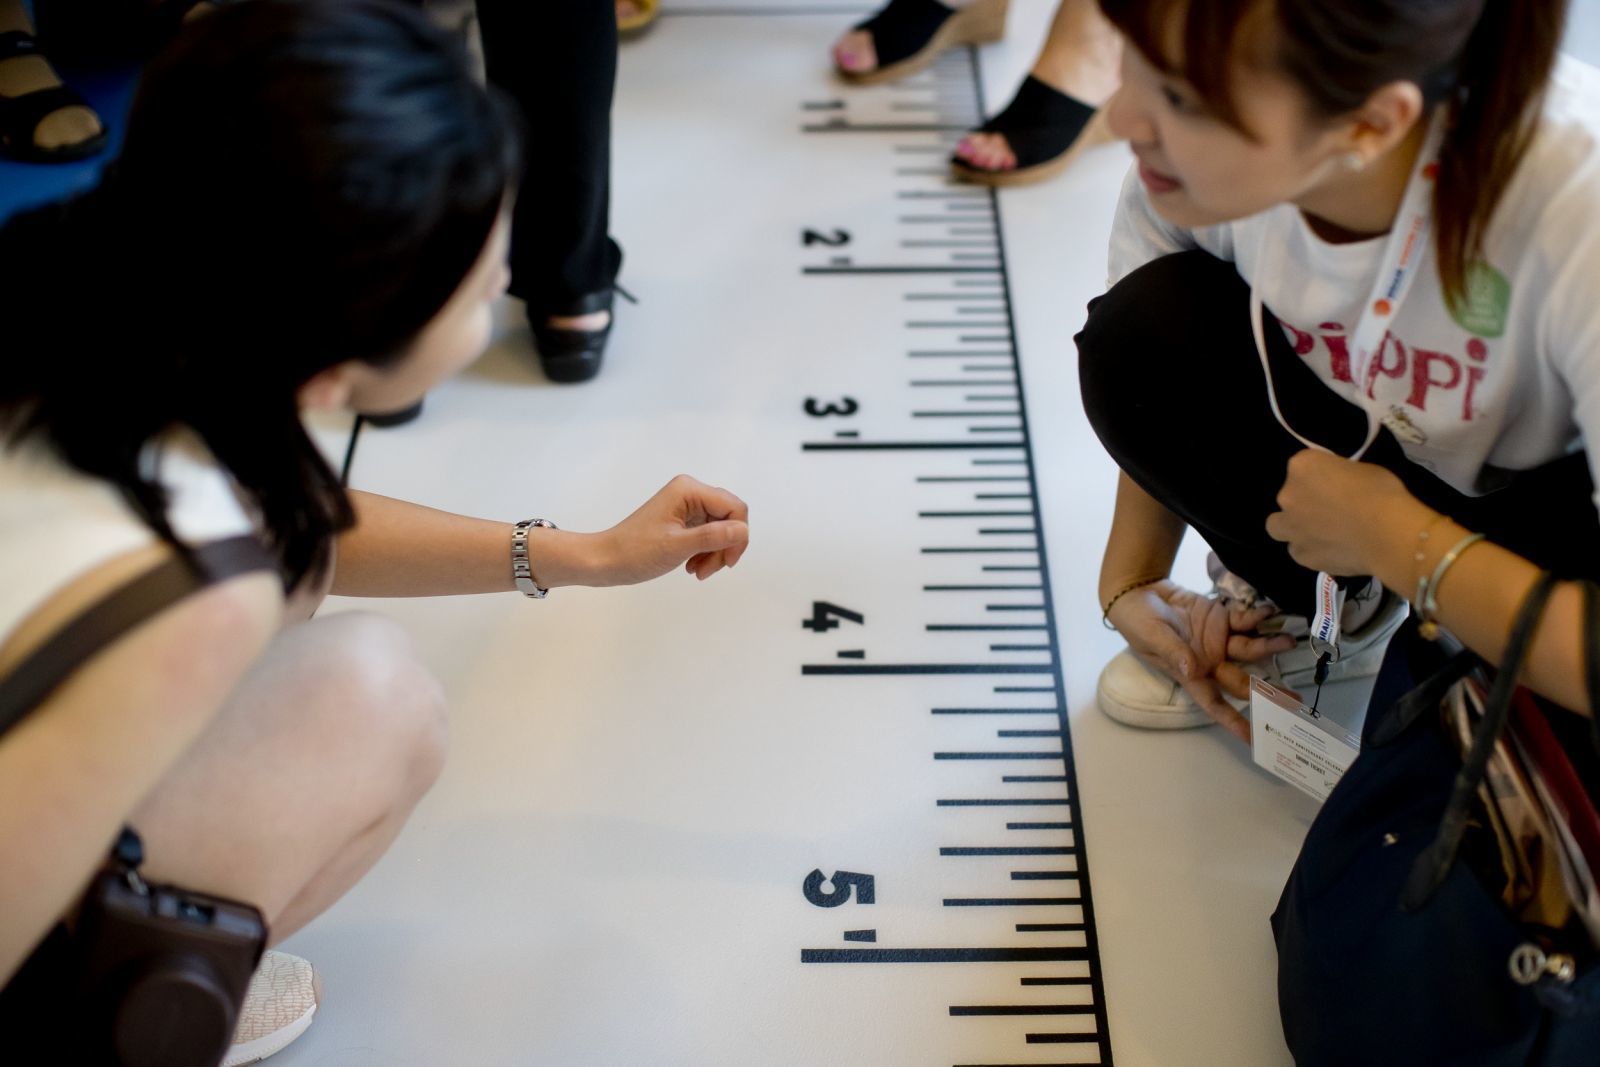 Two students crouch down in front of a giant measuring tape.